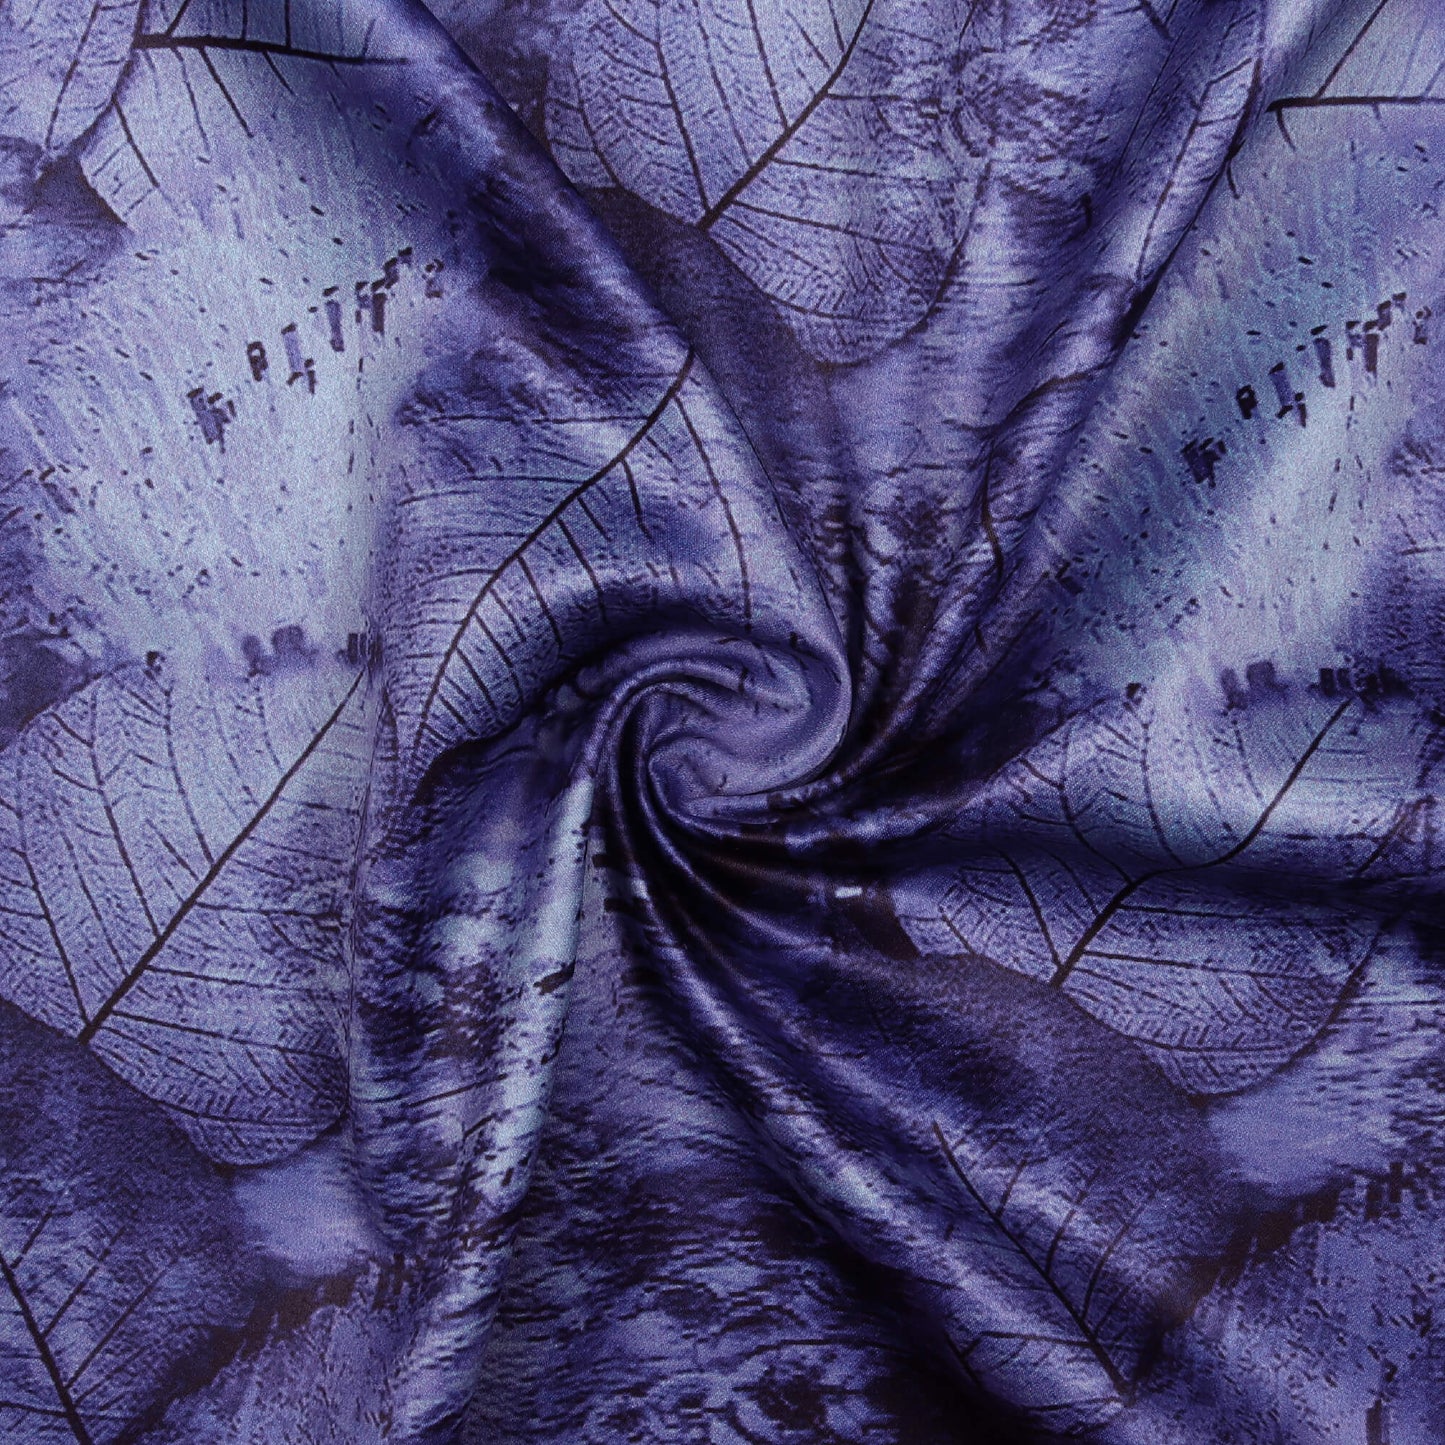 Berry Blue Leaf Pattern Digital Print Charmeuse Satin Fabric (Width 58 Inches)